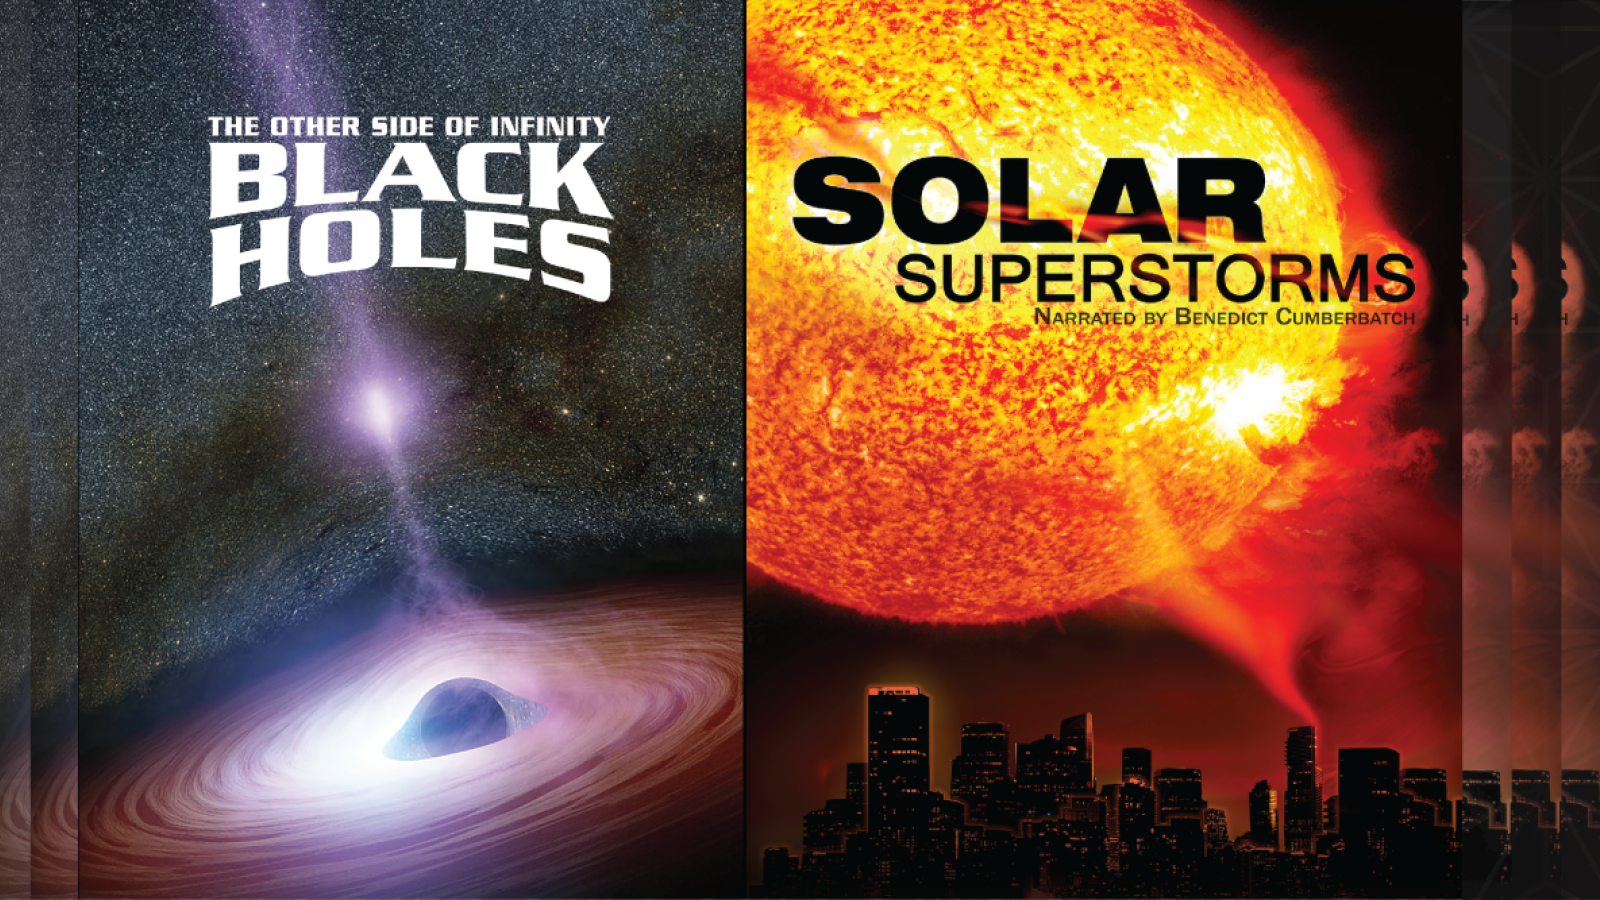 Artist illustration of a black hole up close with event horizon and a still image from the film with a close up stellar flare over a city